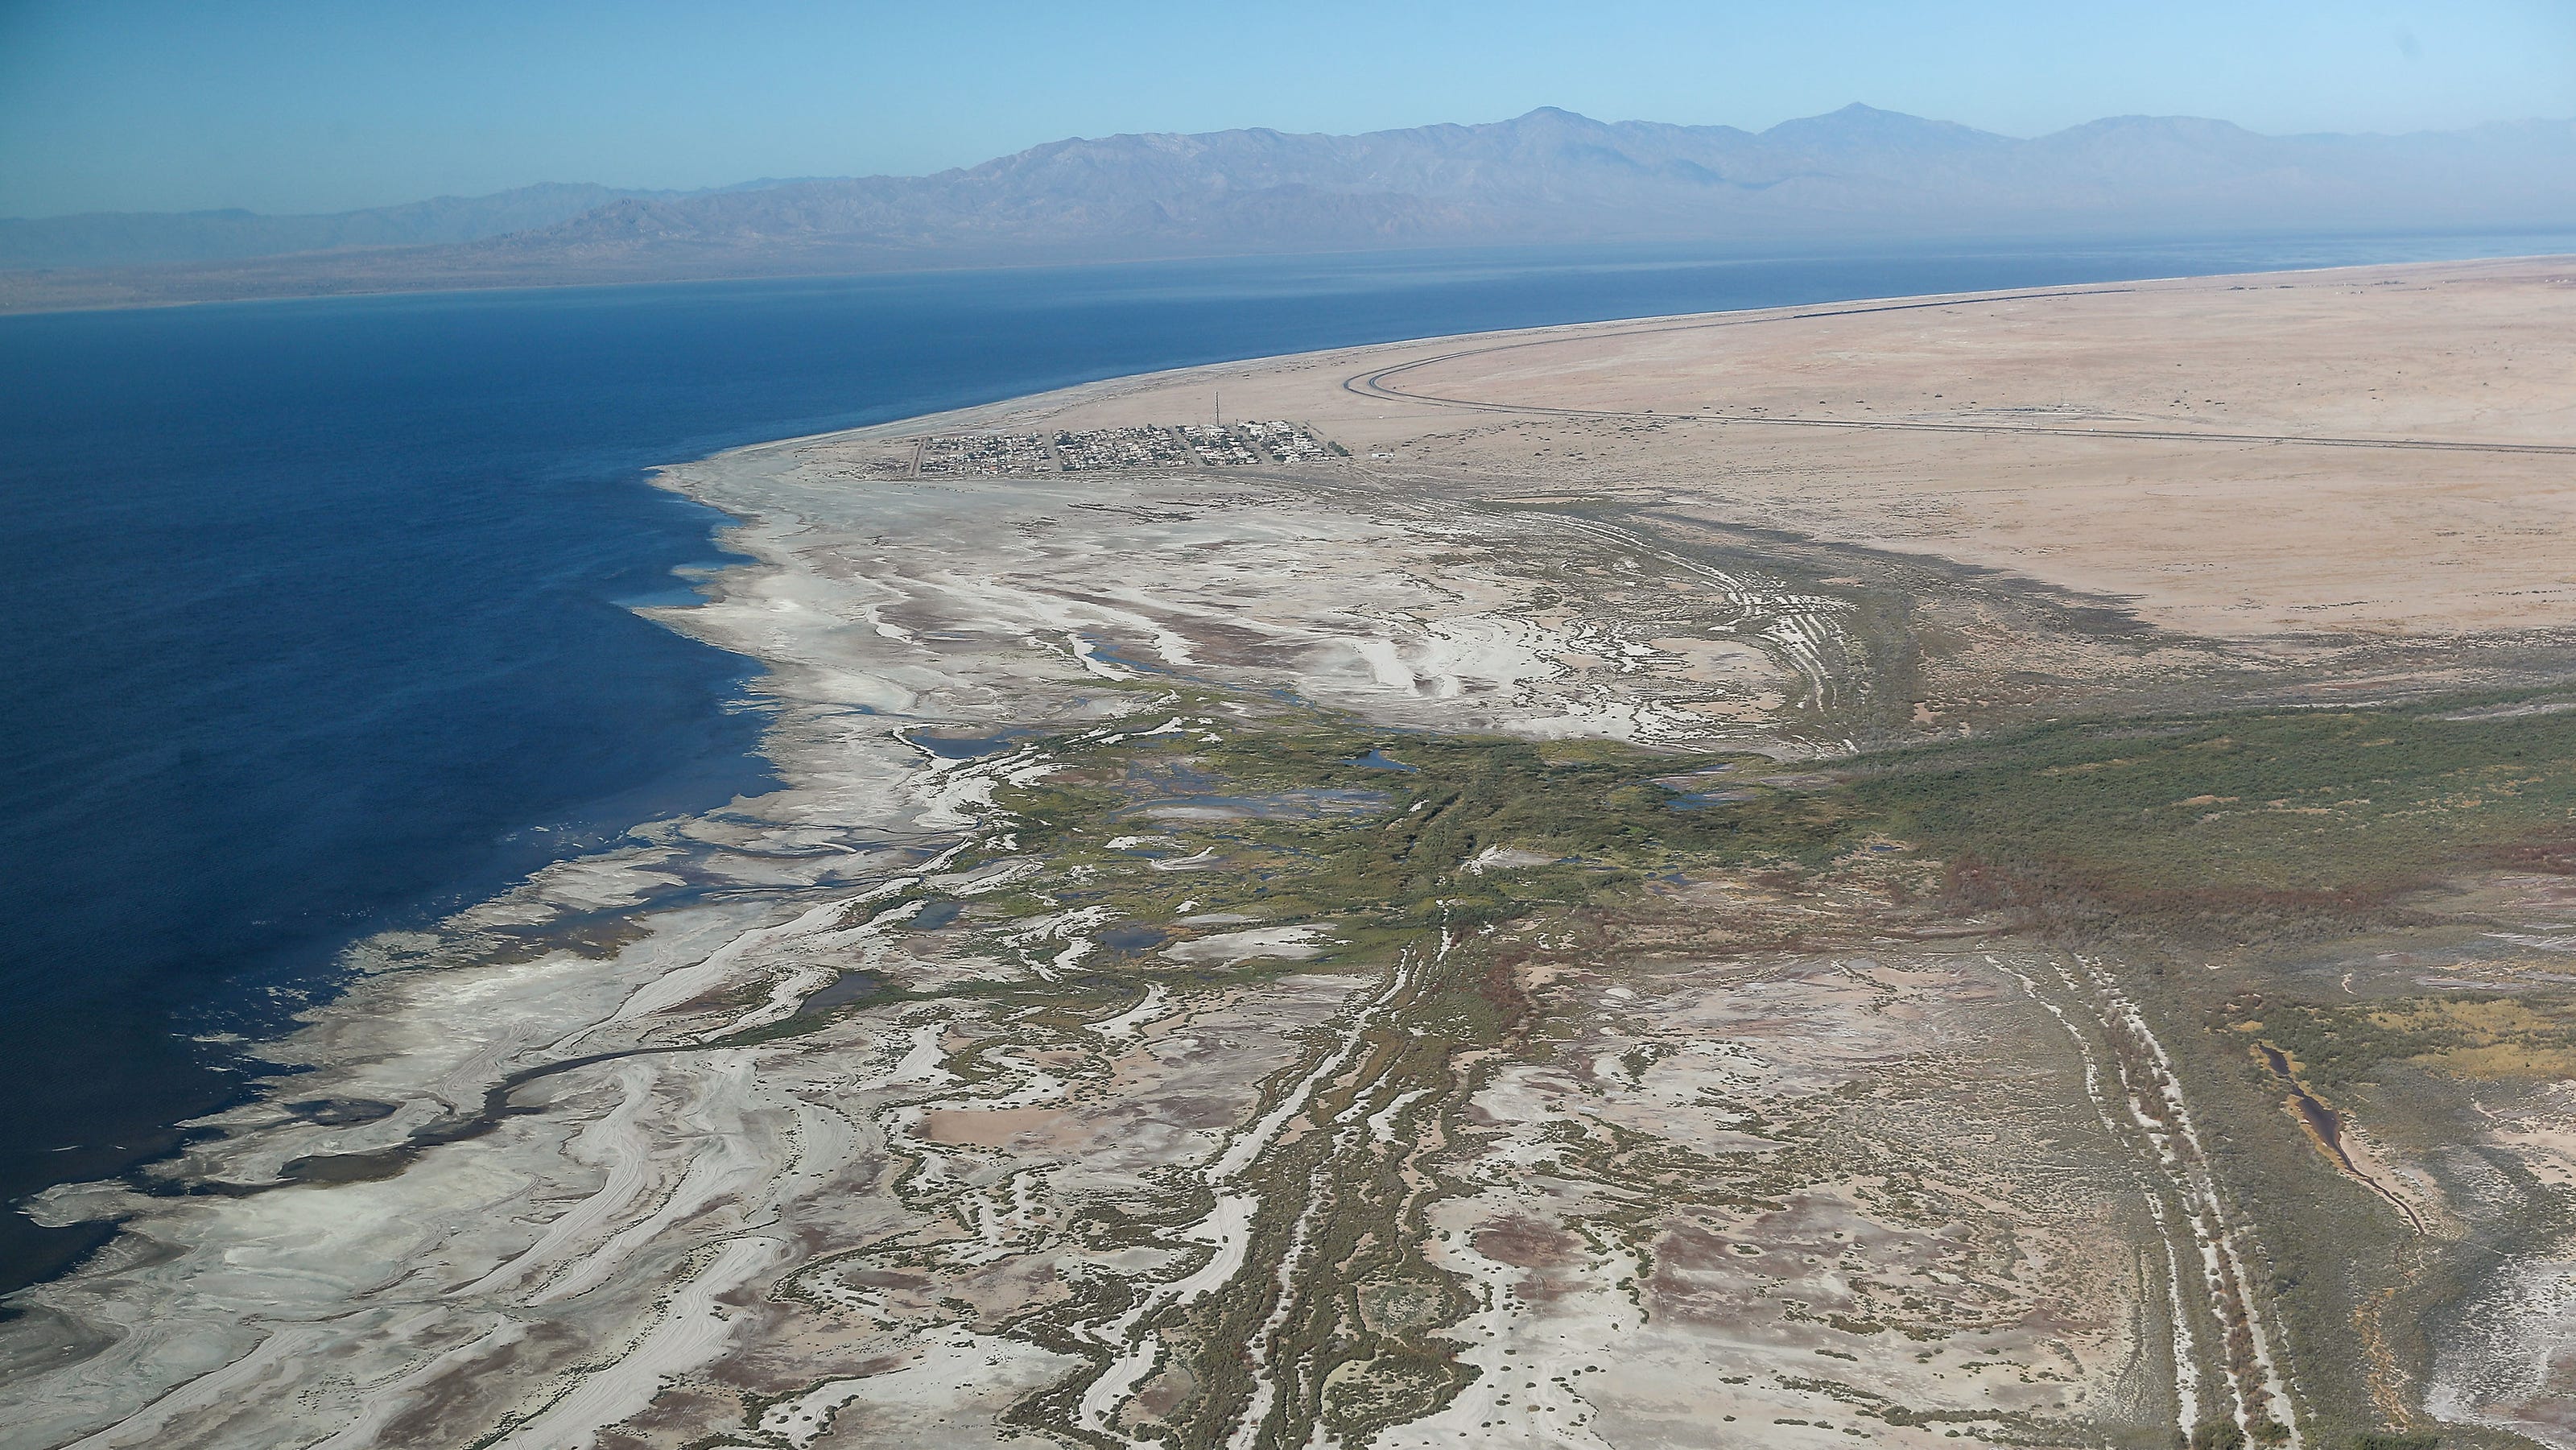 Wellknown Salton Sea origin story questioned by new research